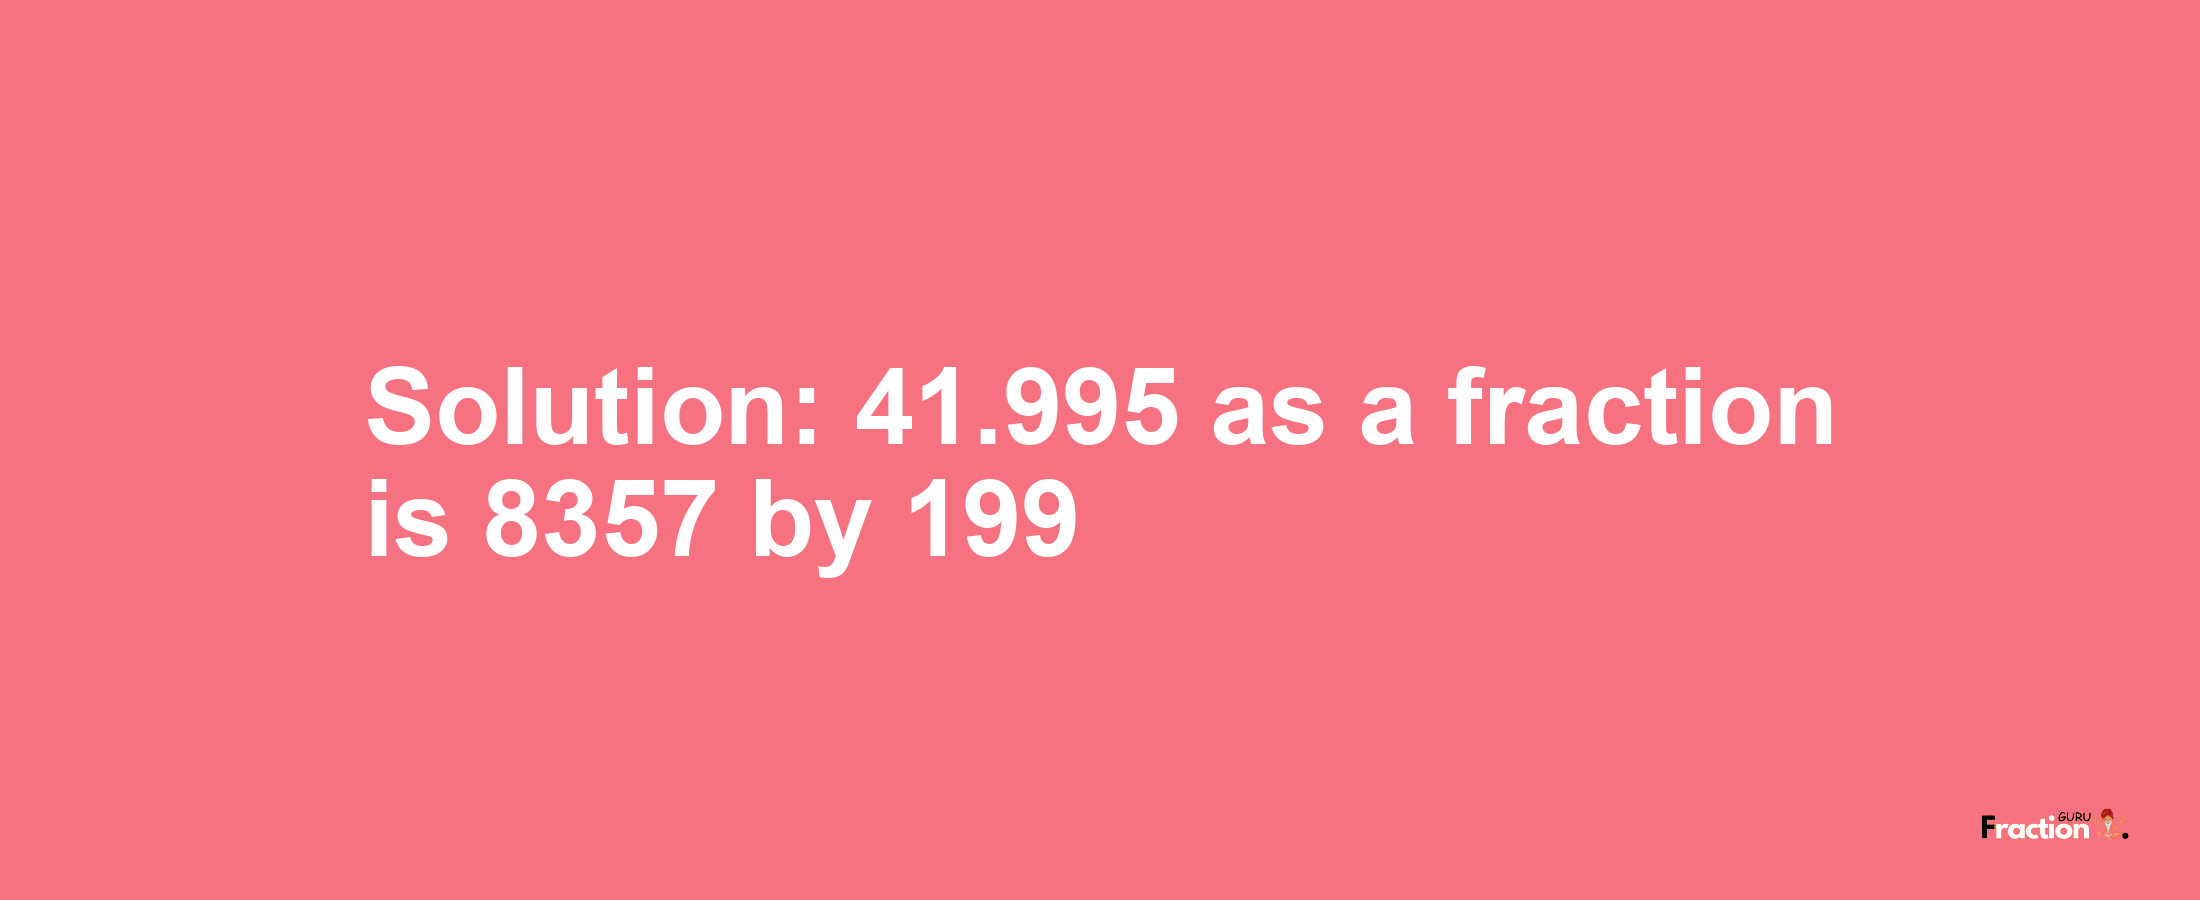 Solution:41.995 as a fraction is 8357/199